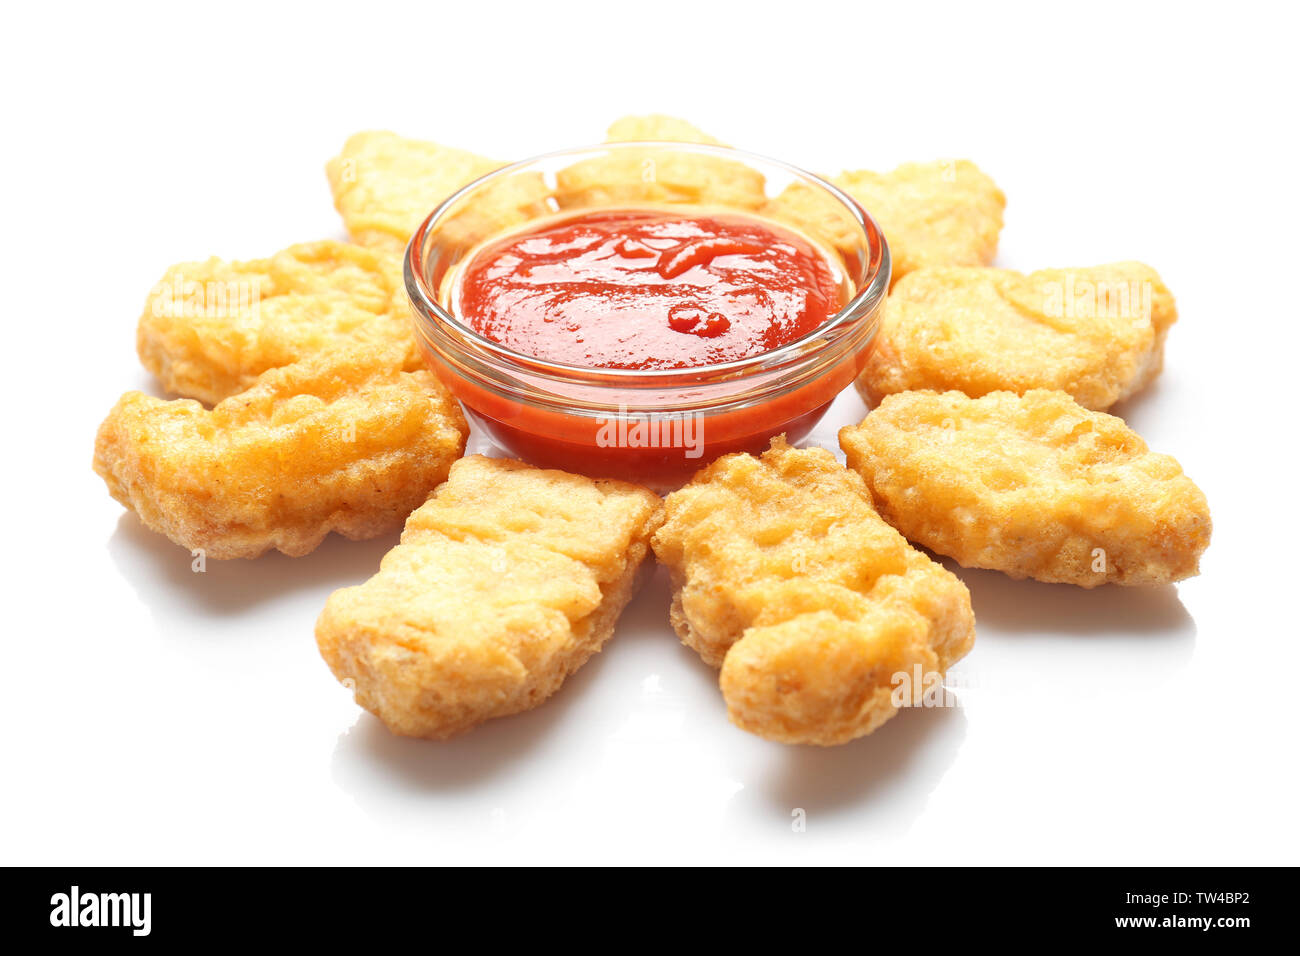 Chicken nuggets 36 food Page hi-res fast and stock - - Alamy photography images